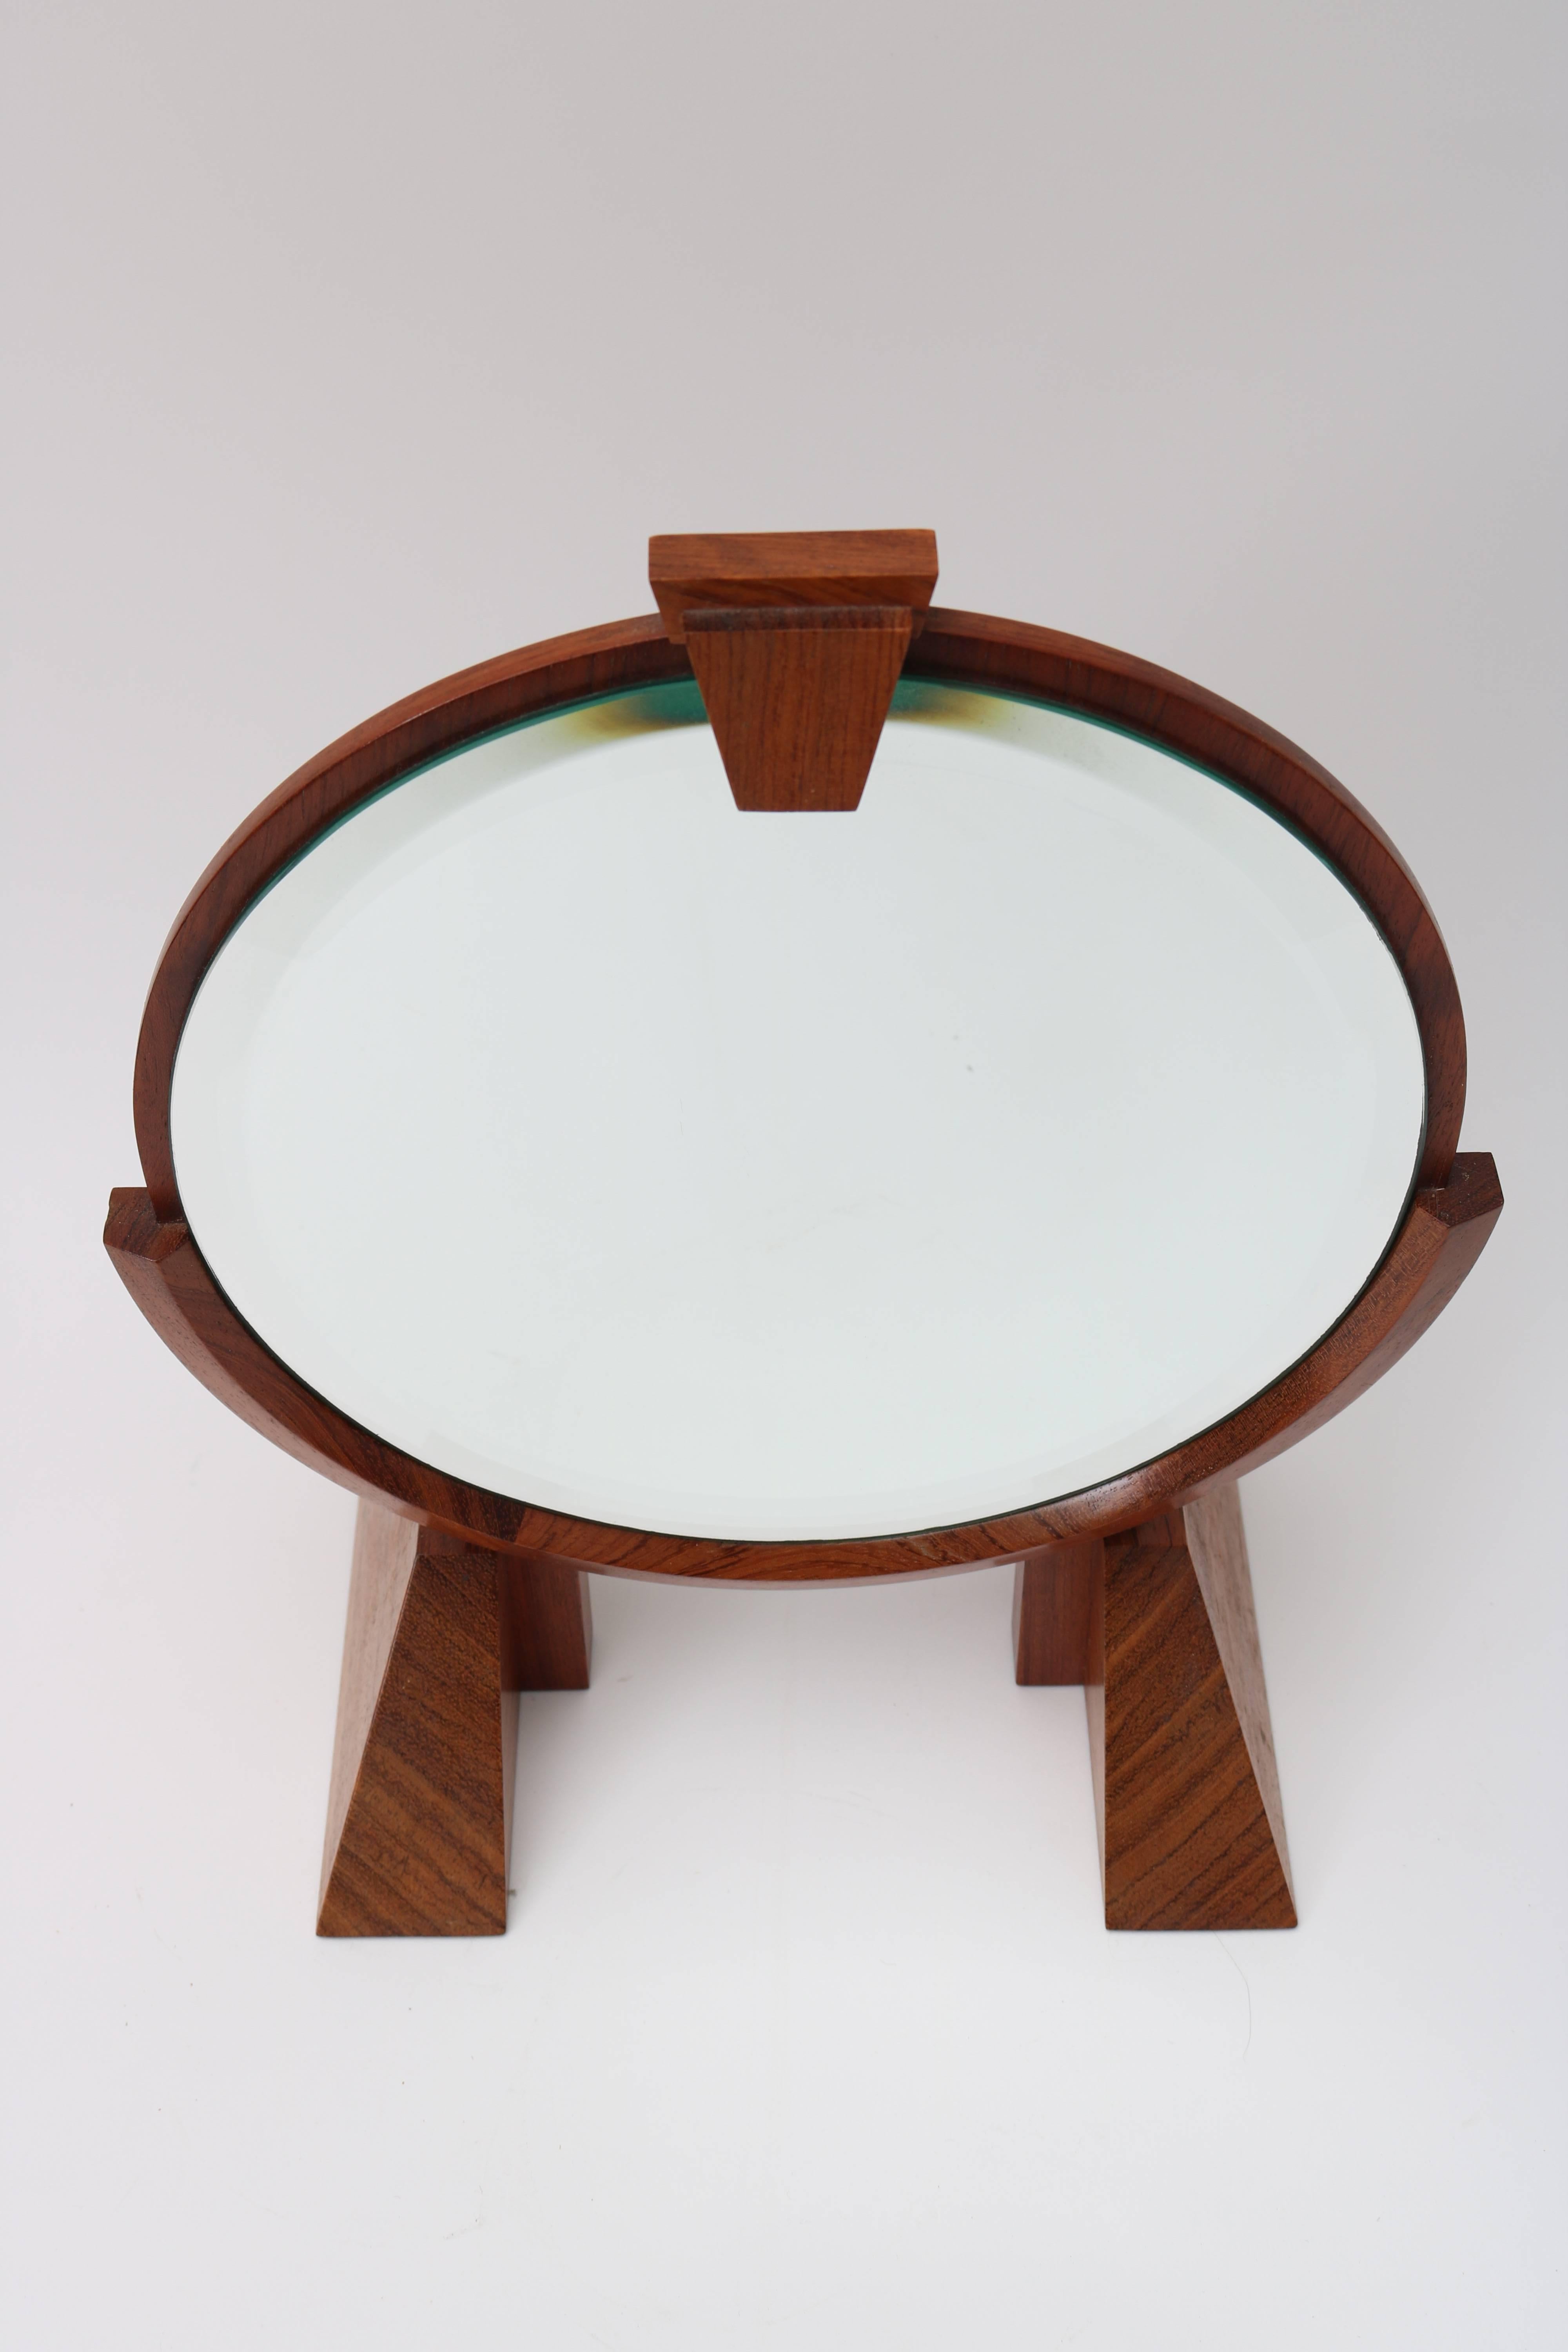 This artisan piece will make the perfect addition to your Mid-Century dressing table with its adjustable angle mirror, clean lines, simple form and beautiful use of woods.

Note: Diameter of mirror is 9.50